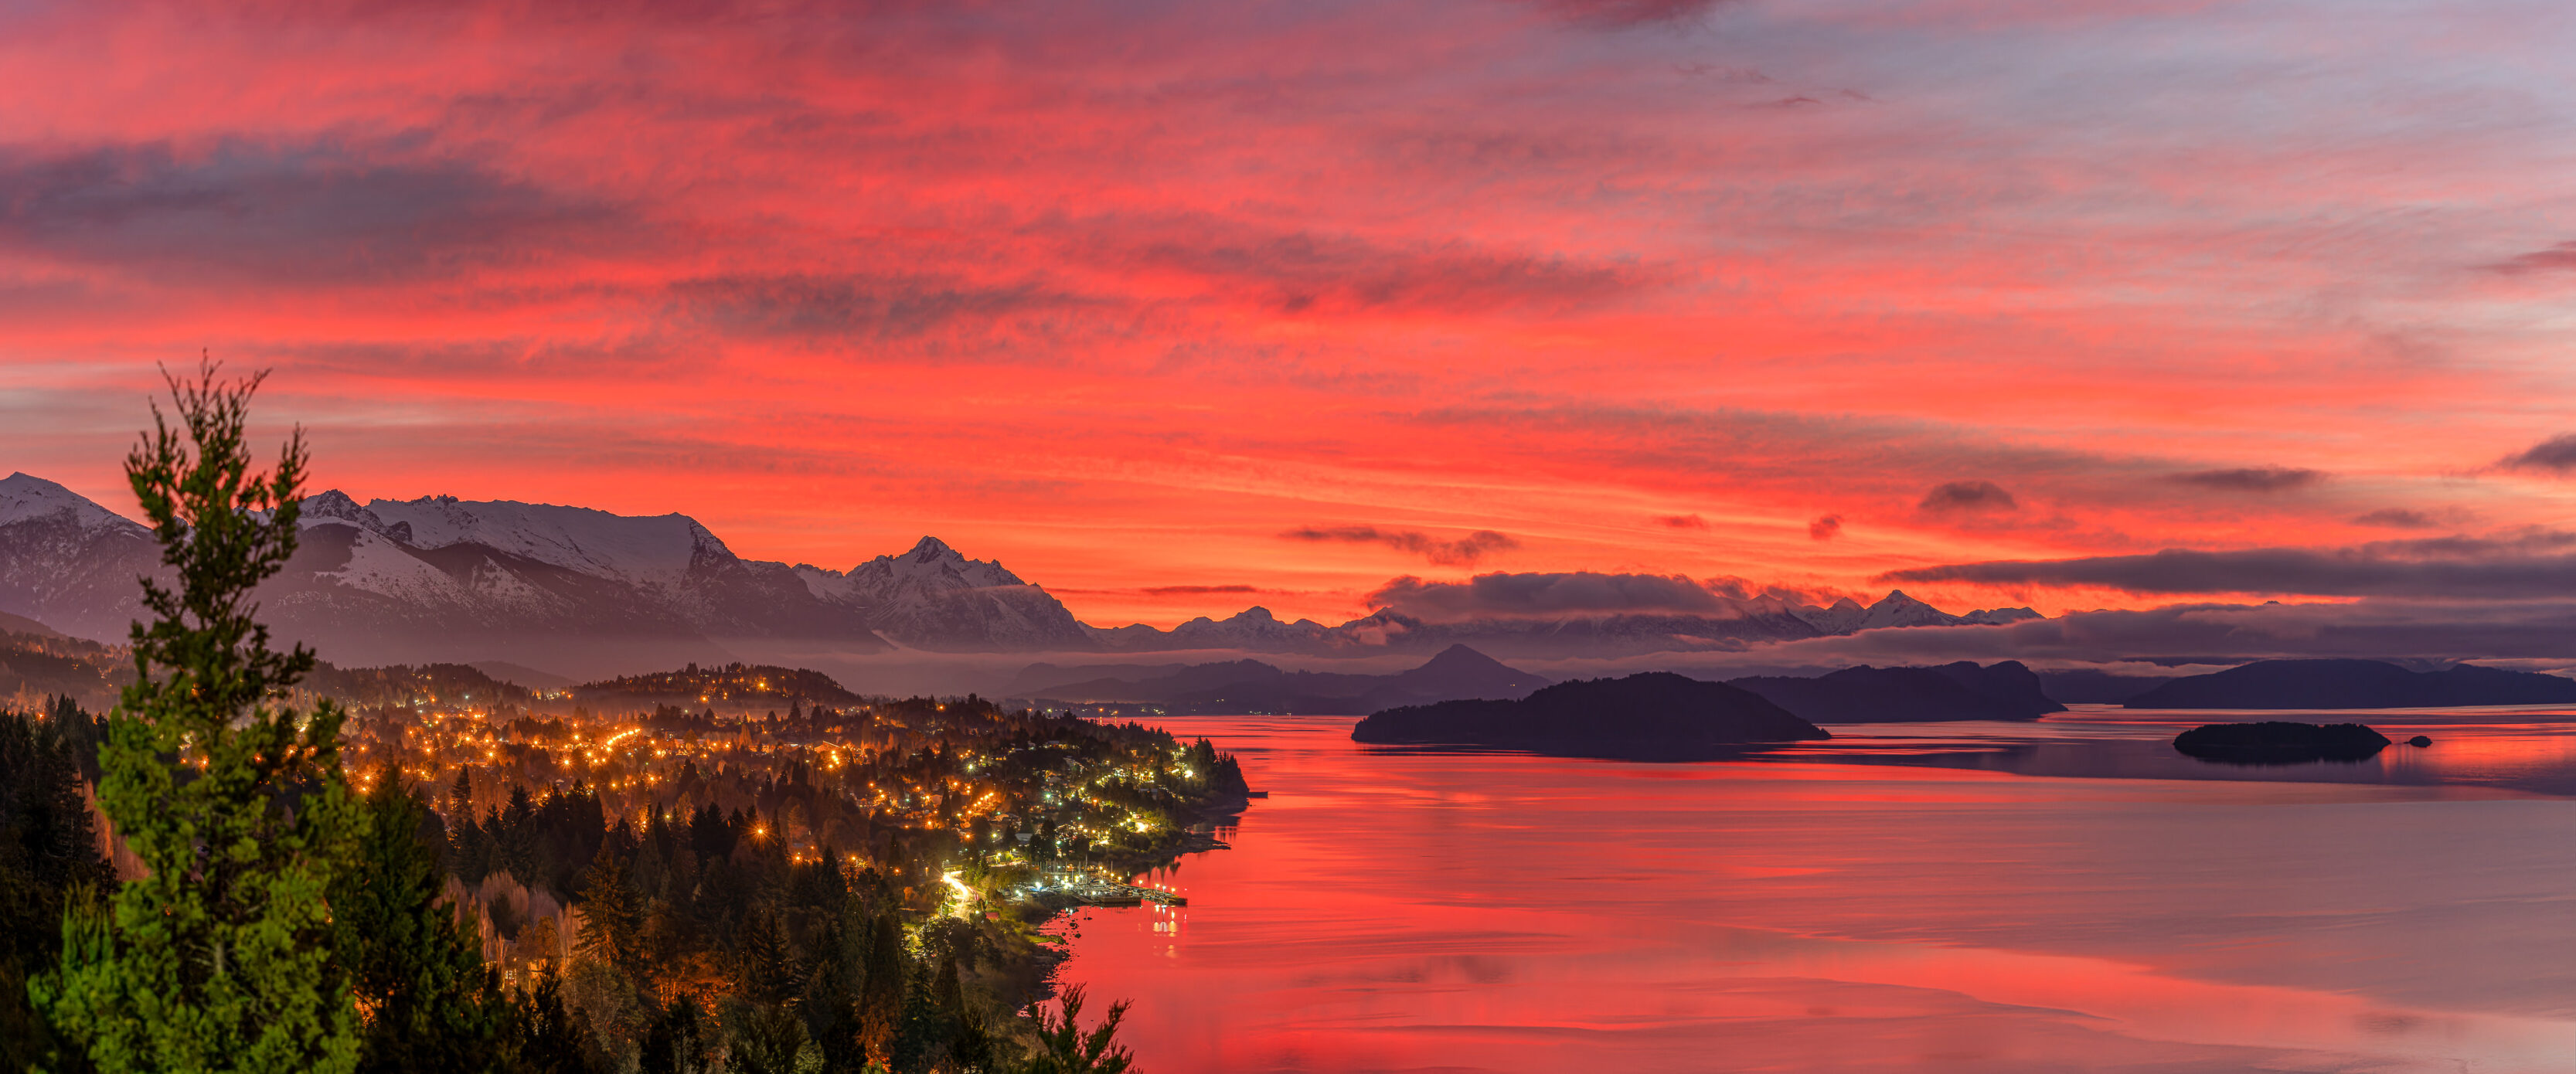 The Second Sunset In Bariloche